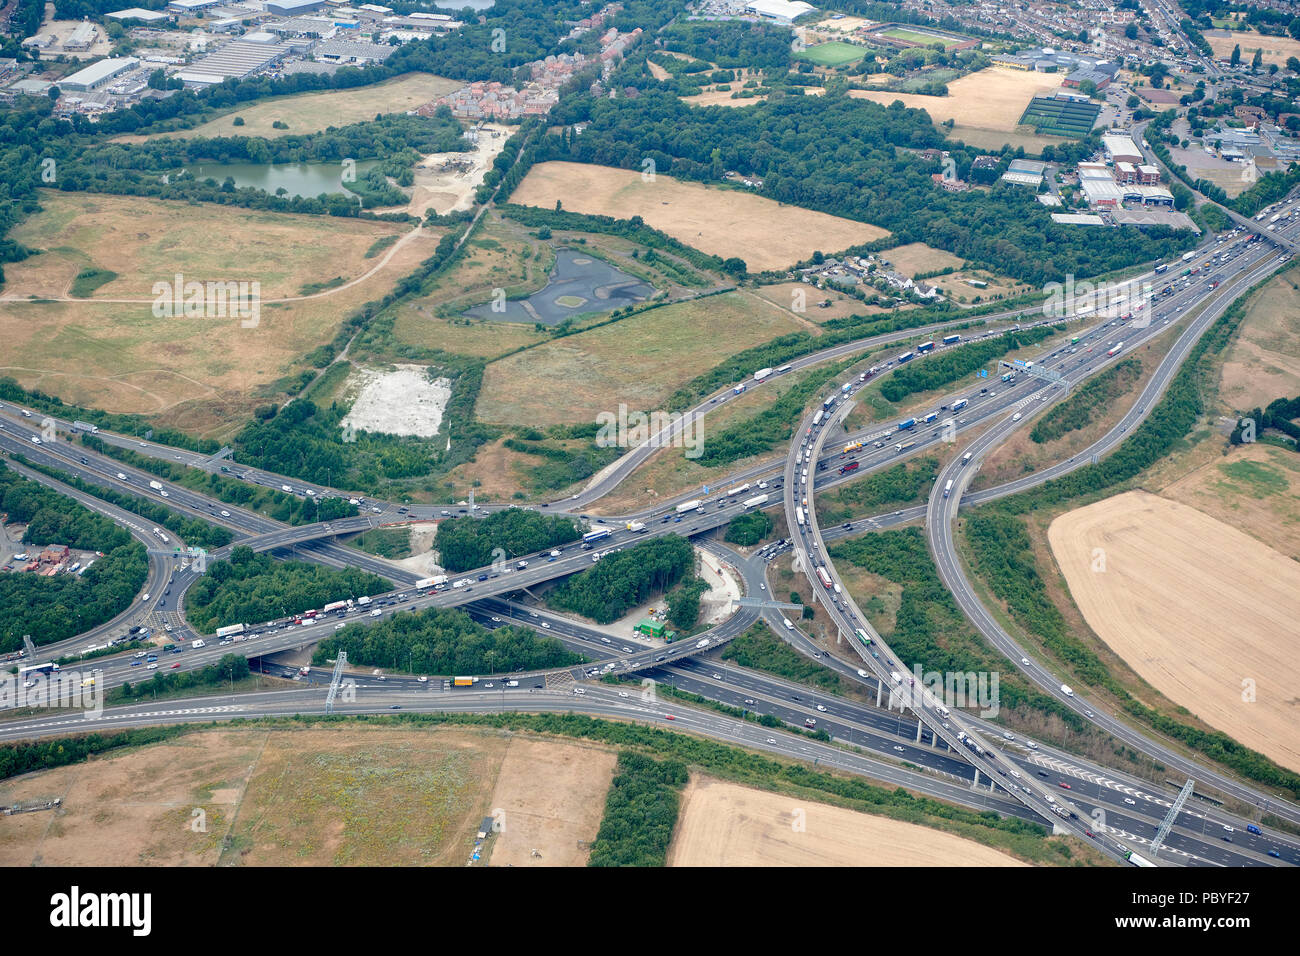 An aerial view of the M25/M2 Junction, Dartford, Kent, South East England, UK Stock Photo